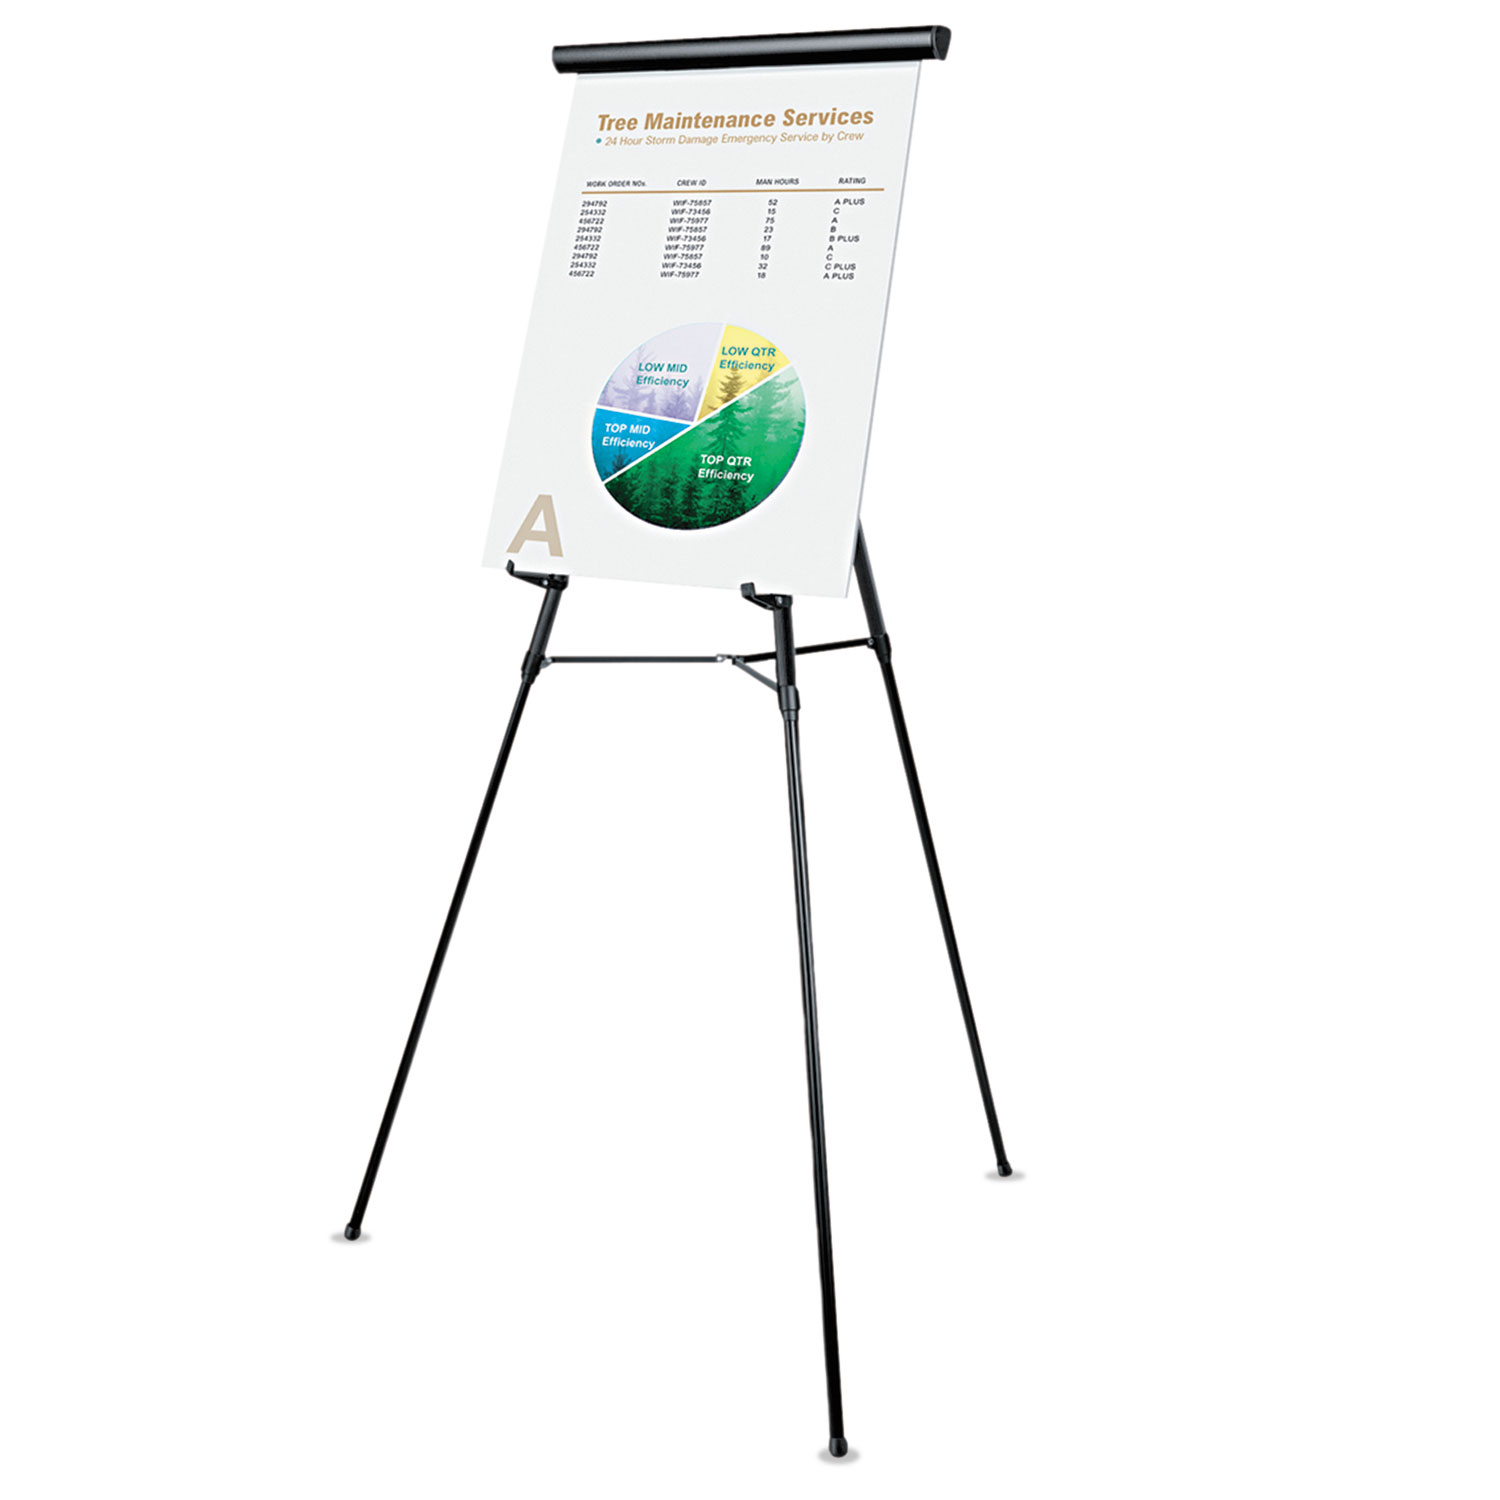 3-Leg Telescoping Easel with Pad Retainer, Adjusts 34 to 64, Aluminum, Black